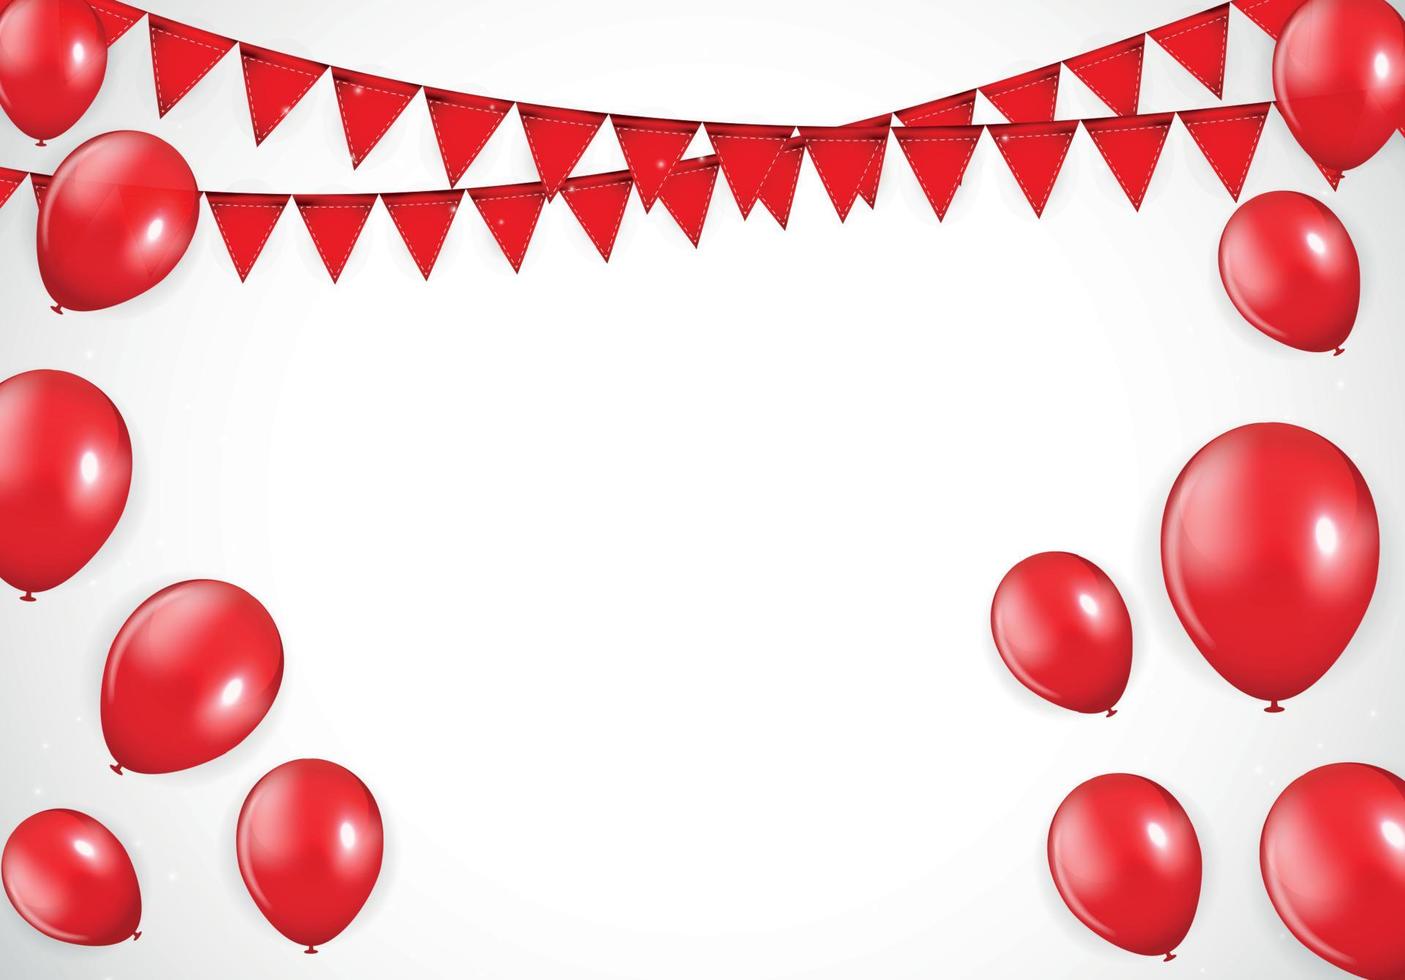 Glossy Red Balloons and Flaf Background Vector Illustration